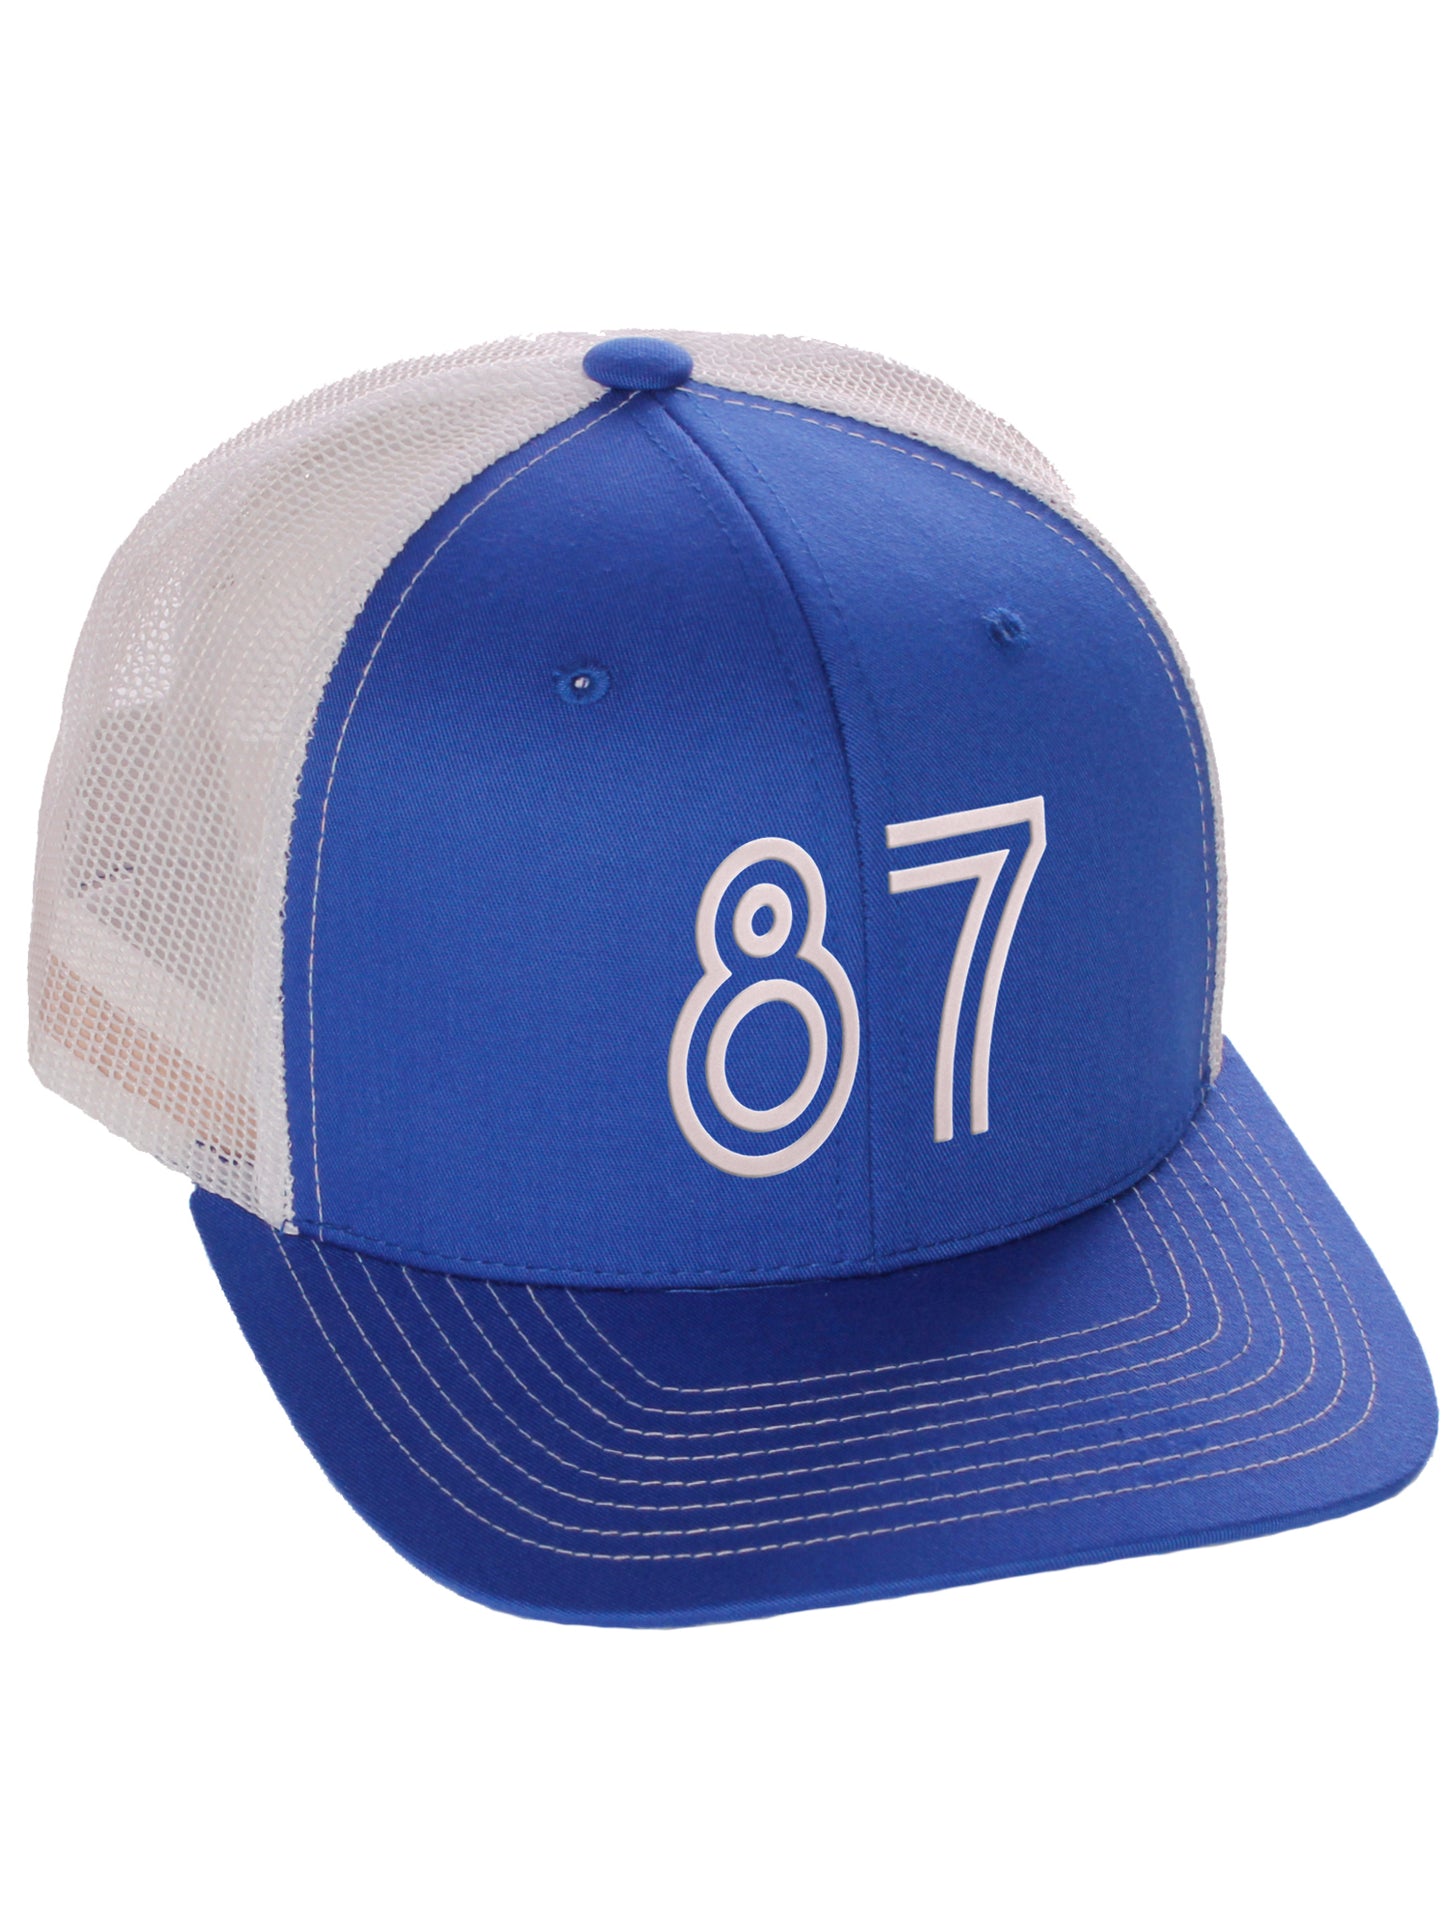 Daxton Team Numbers Structured Trucker Mesh Hat Mid Profile Cap, Royal White